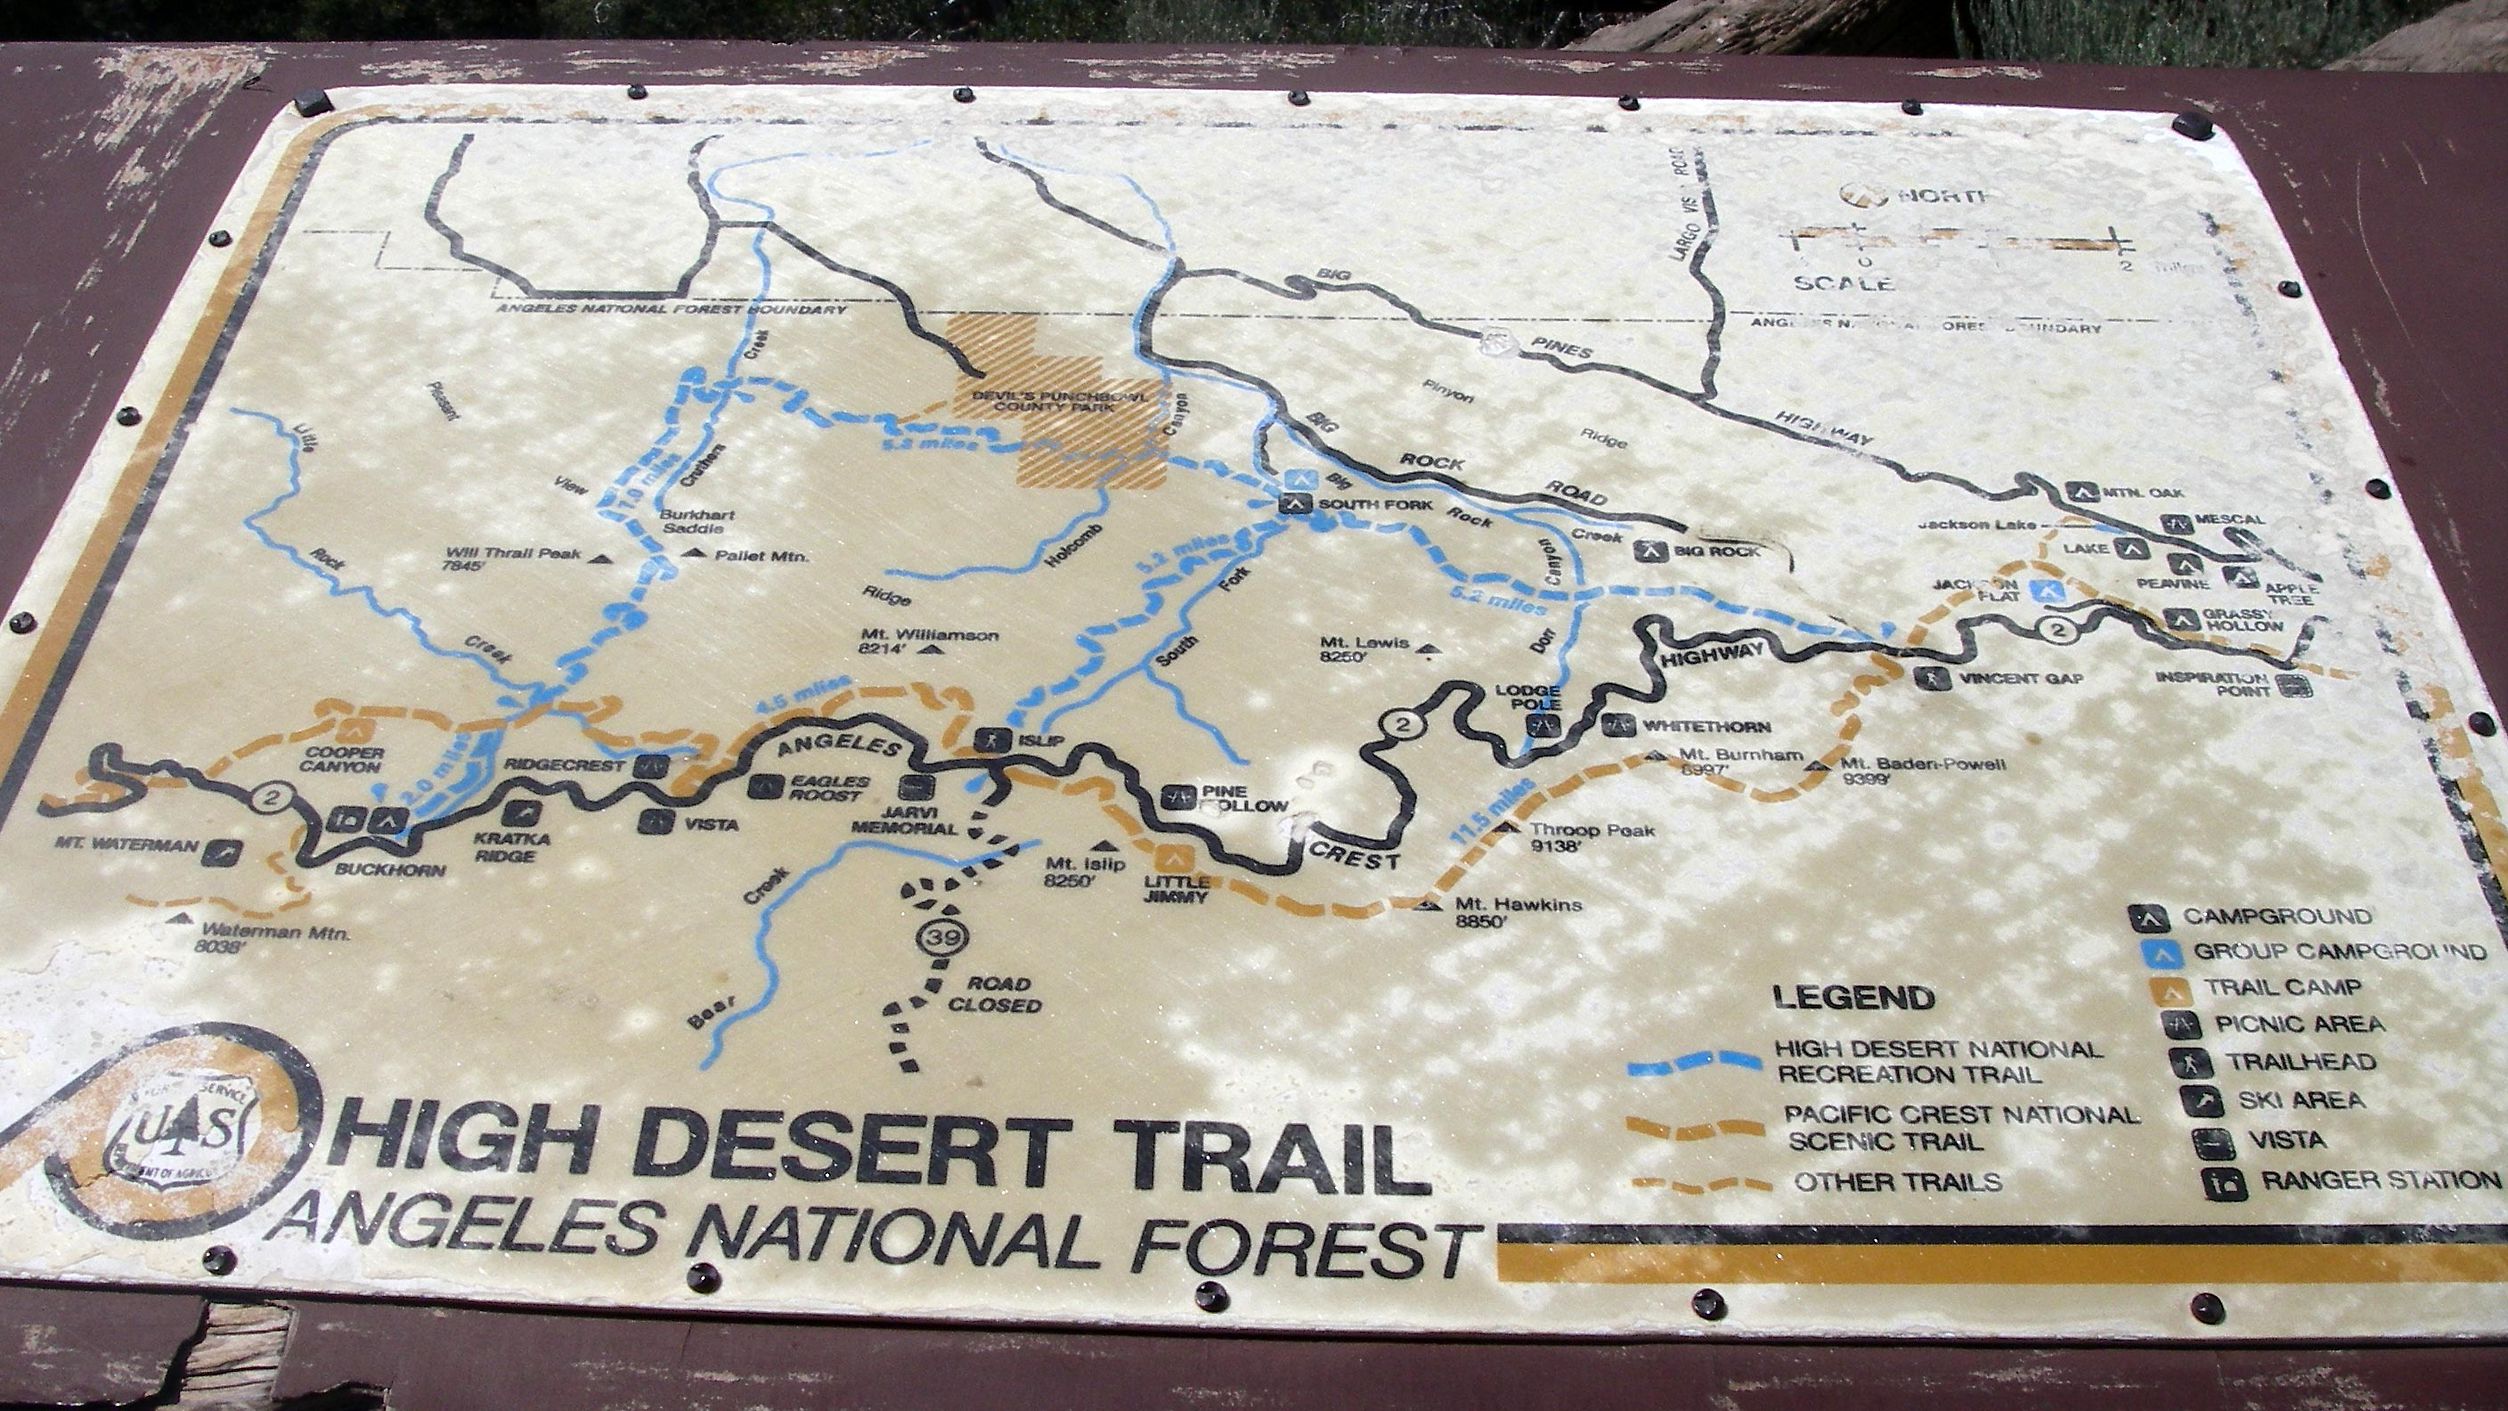 Map of the High Desert Trail segments at Vincent Gap.